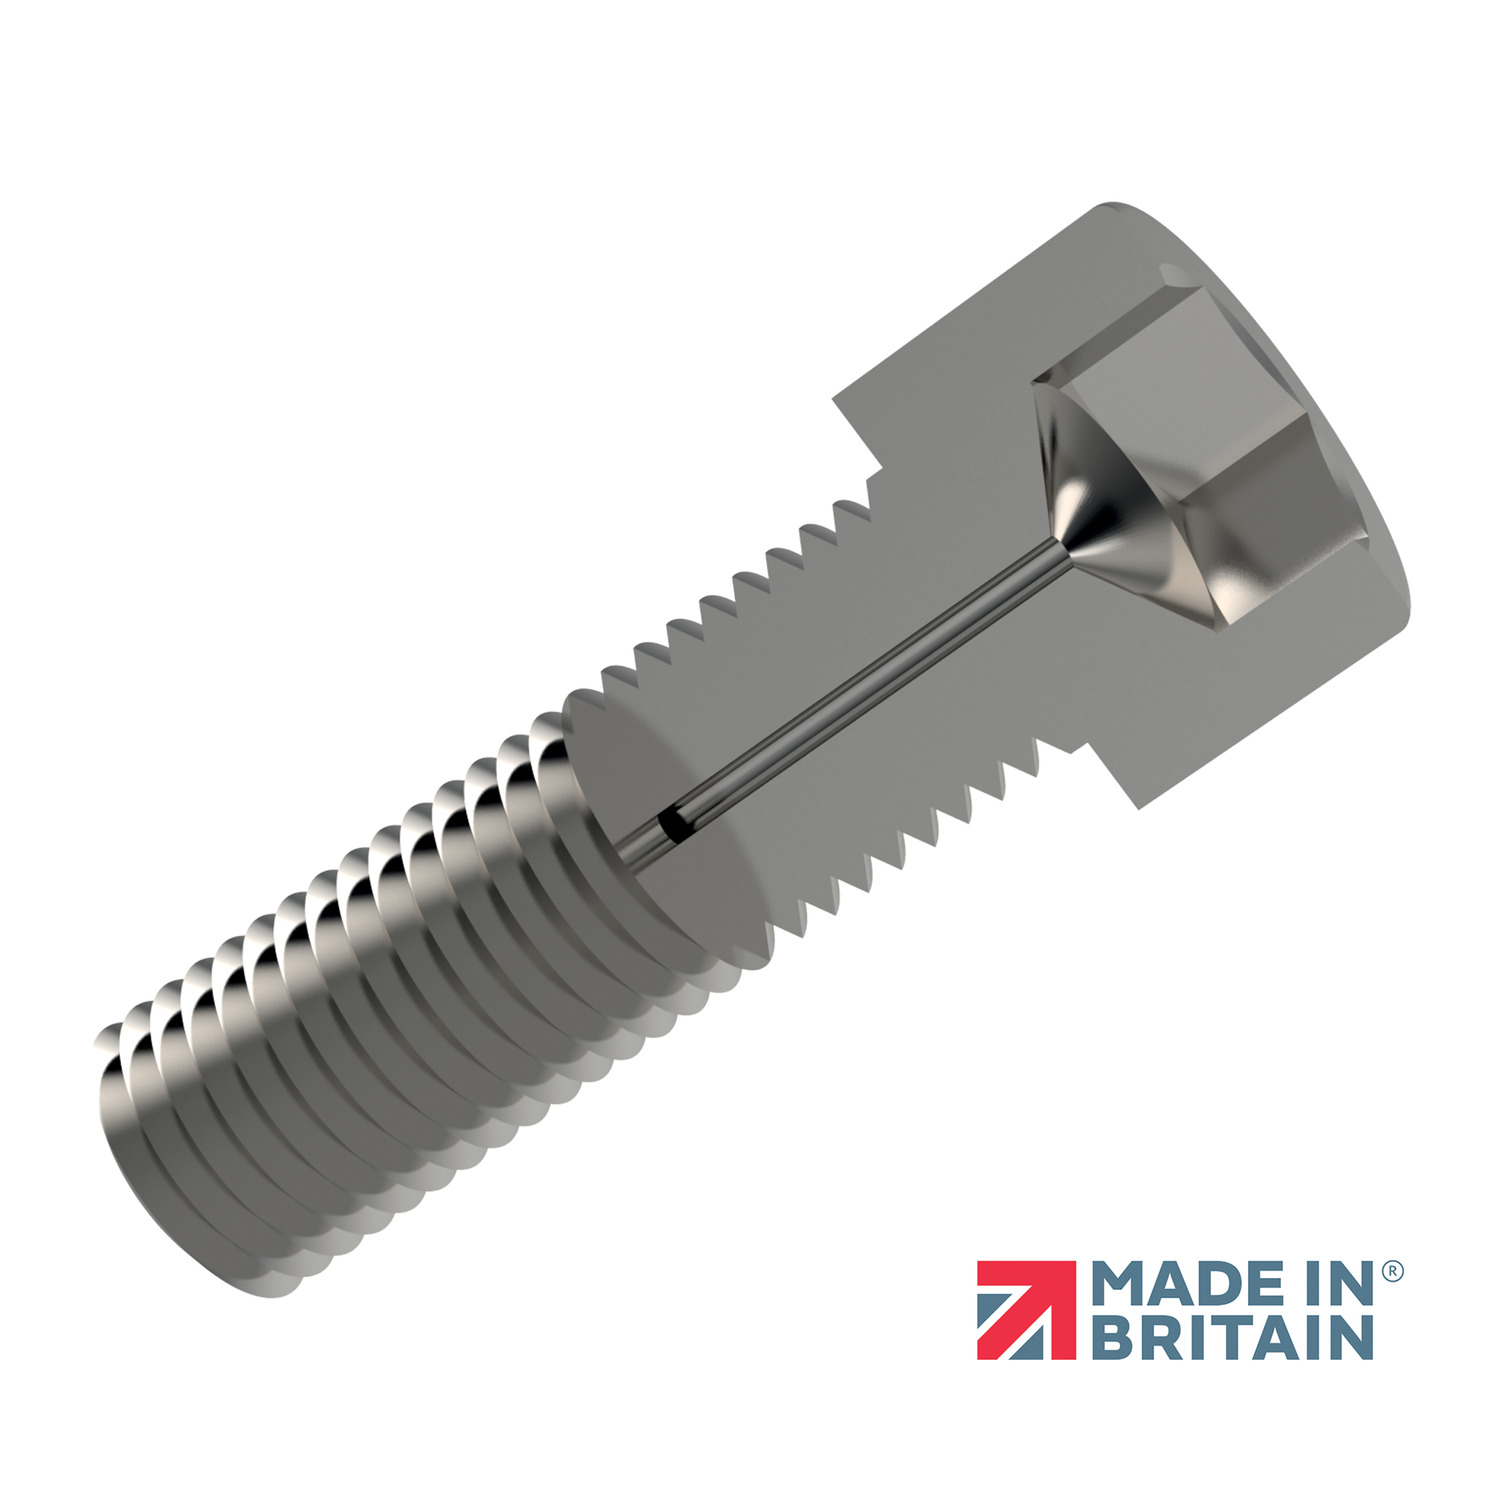 Product P0090.A2, Vented Screws - Cap Head hex. drive - 304 stainless / 